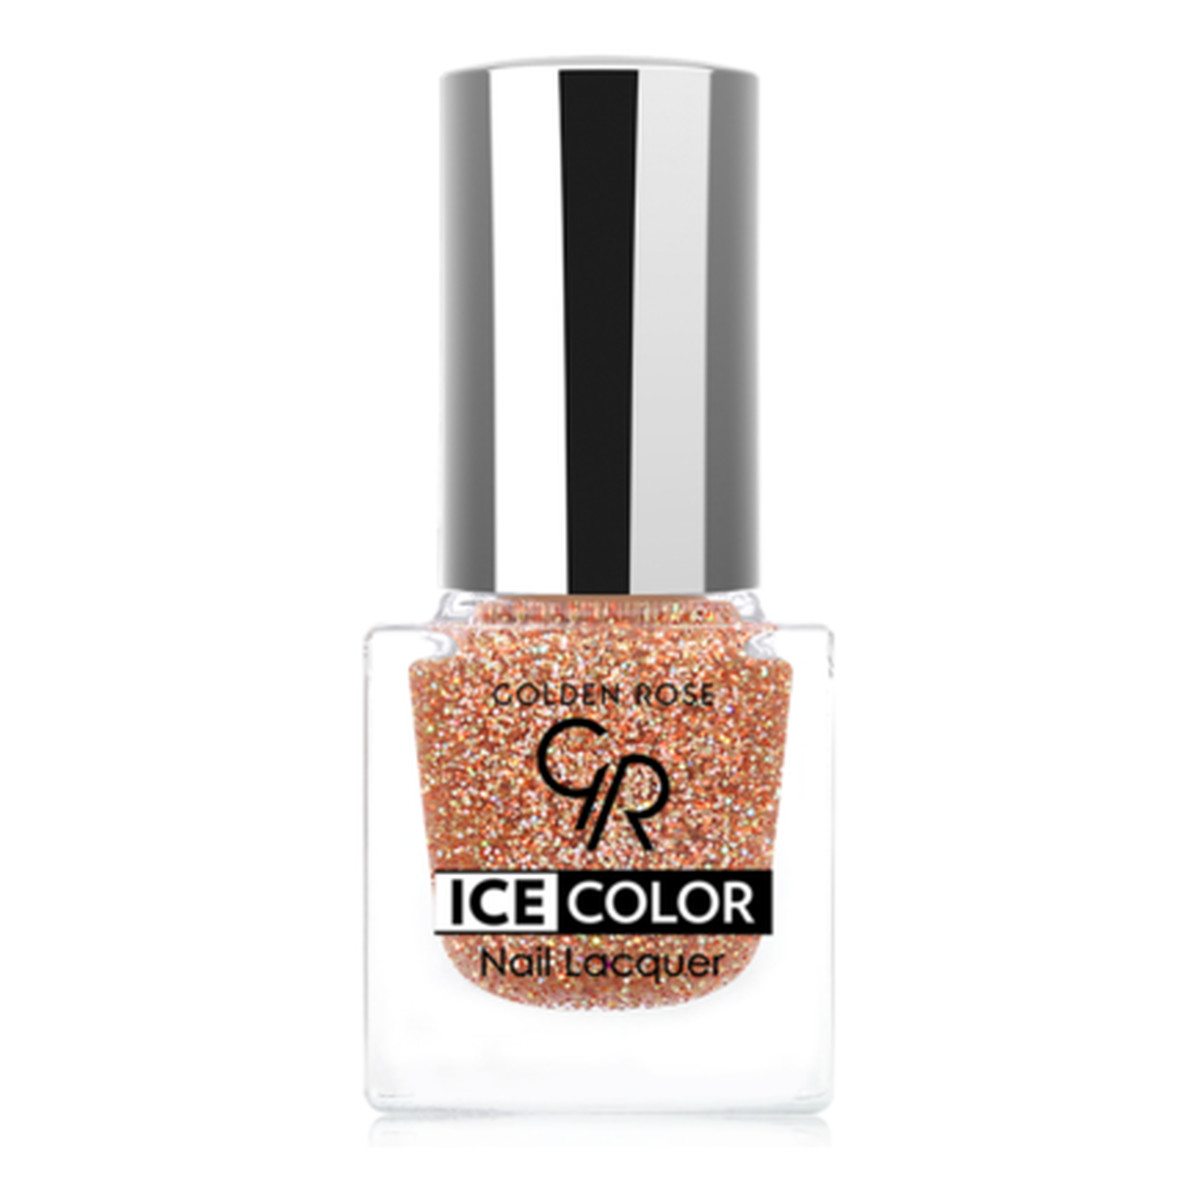 Golden Rose Ice Color Nail Lacquer Glitter Brokatowy lakier do paznokci 6ml